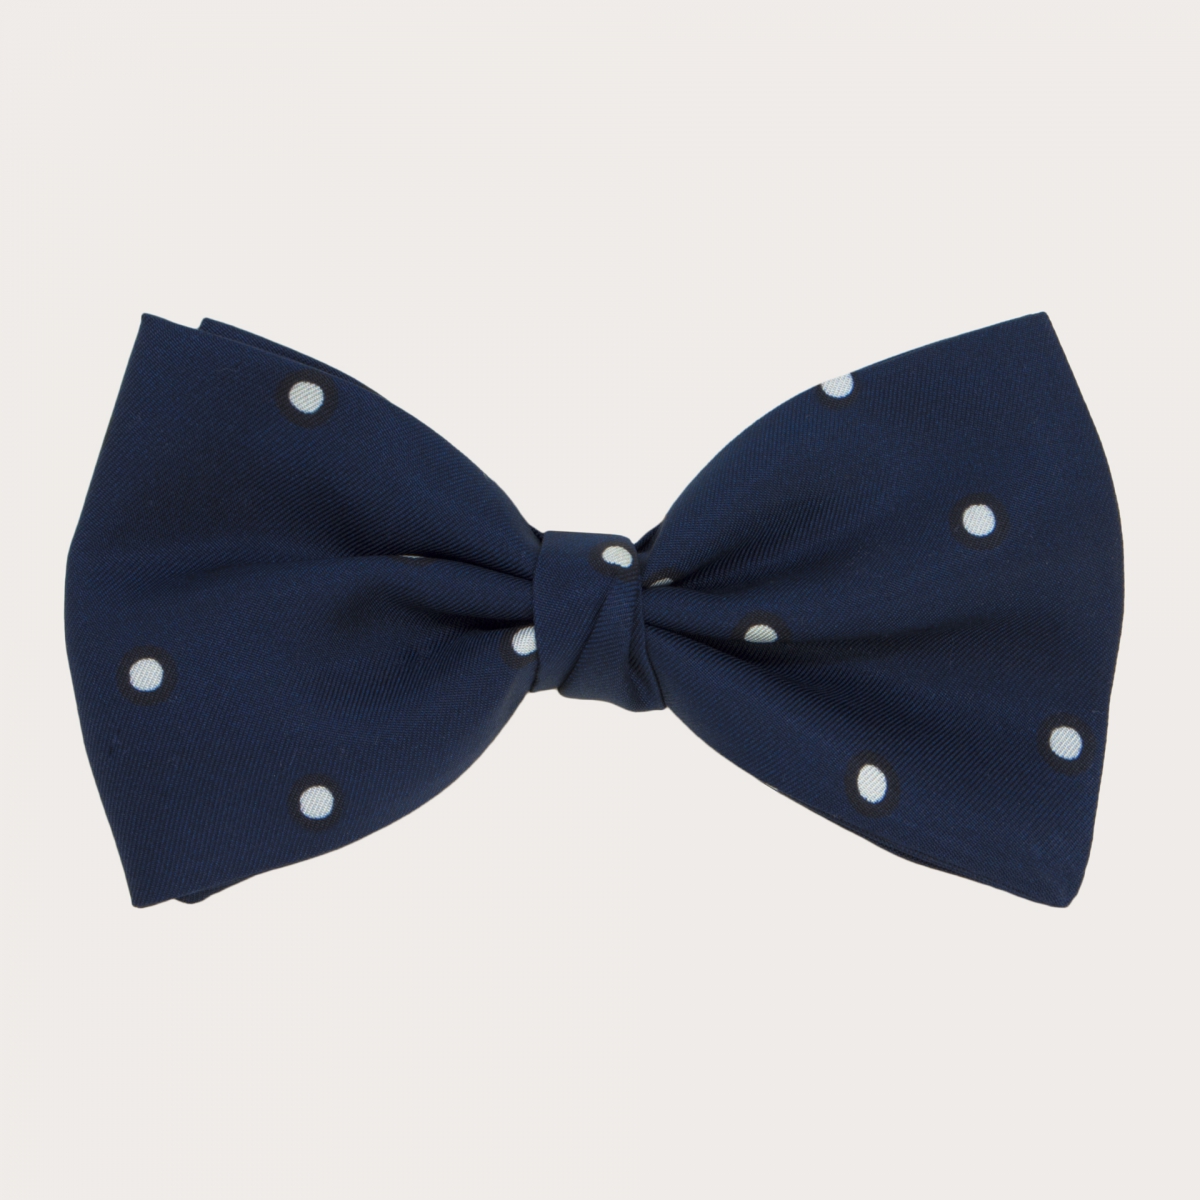 BRUCLE Men's silk bow tie, blue with white polka dot pattern